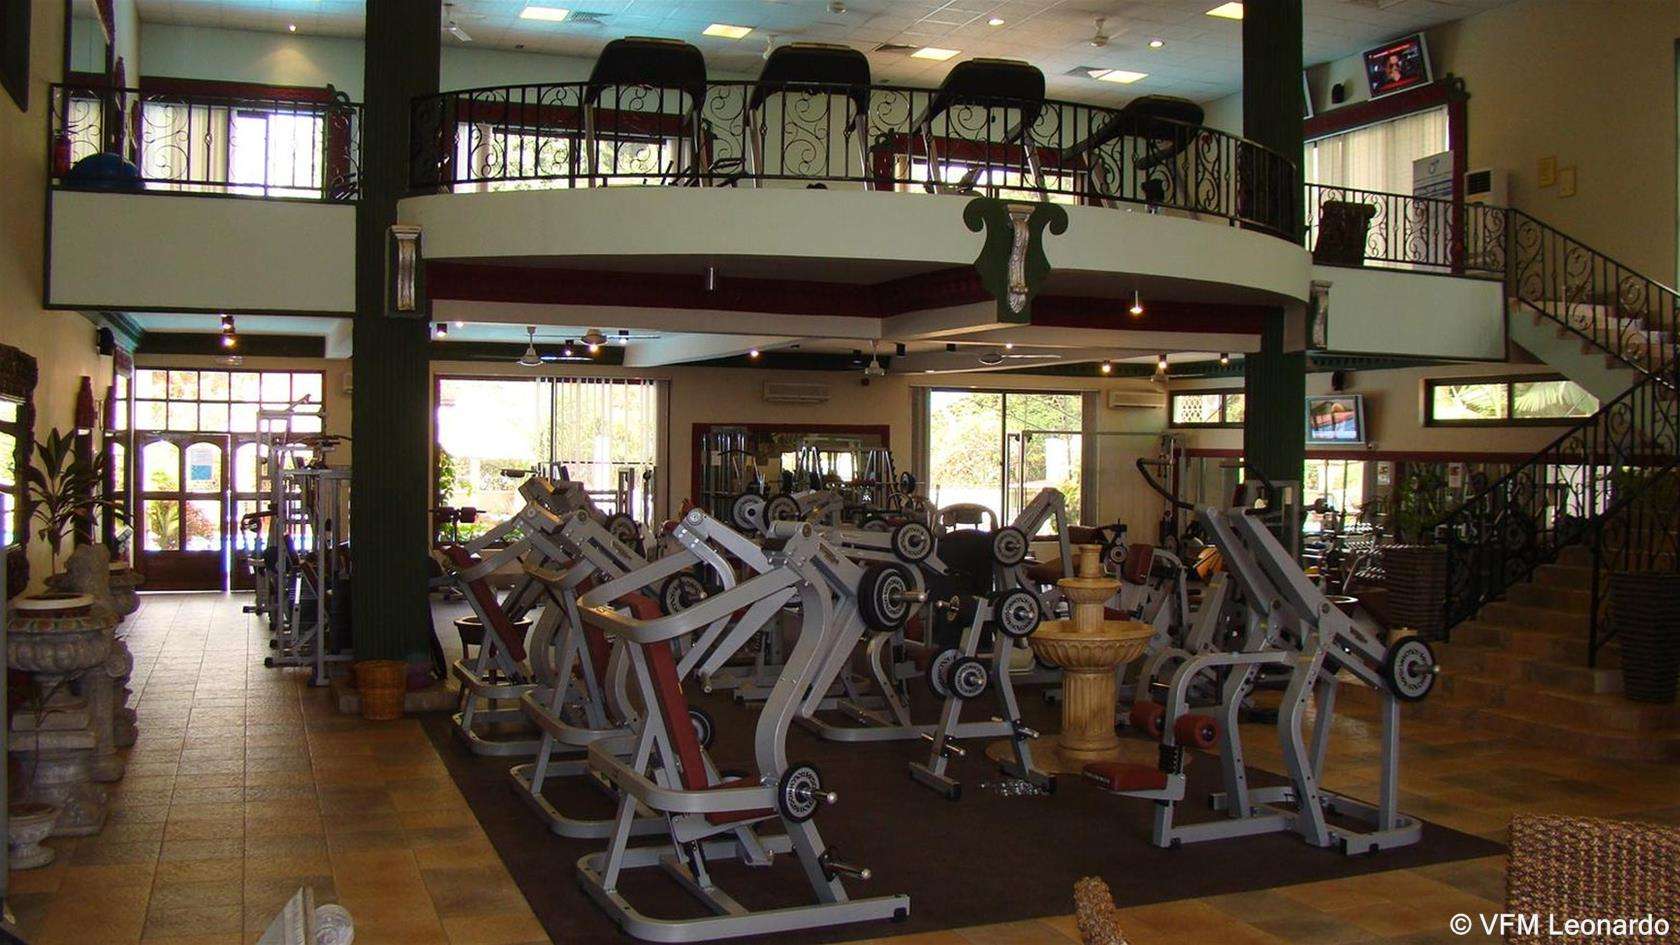 COLOSSEUM HOTEL AND FITNESS CLUB